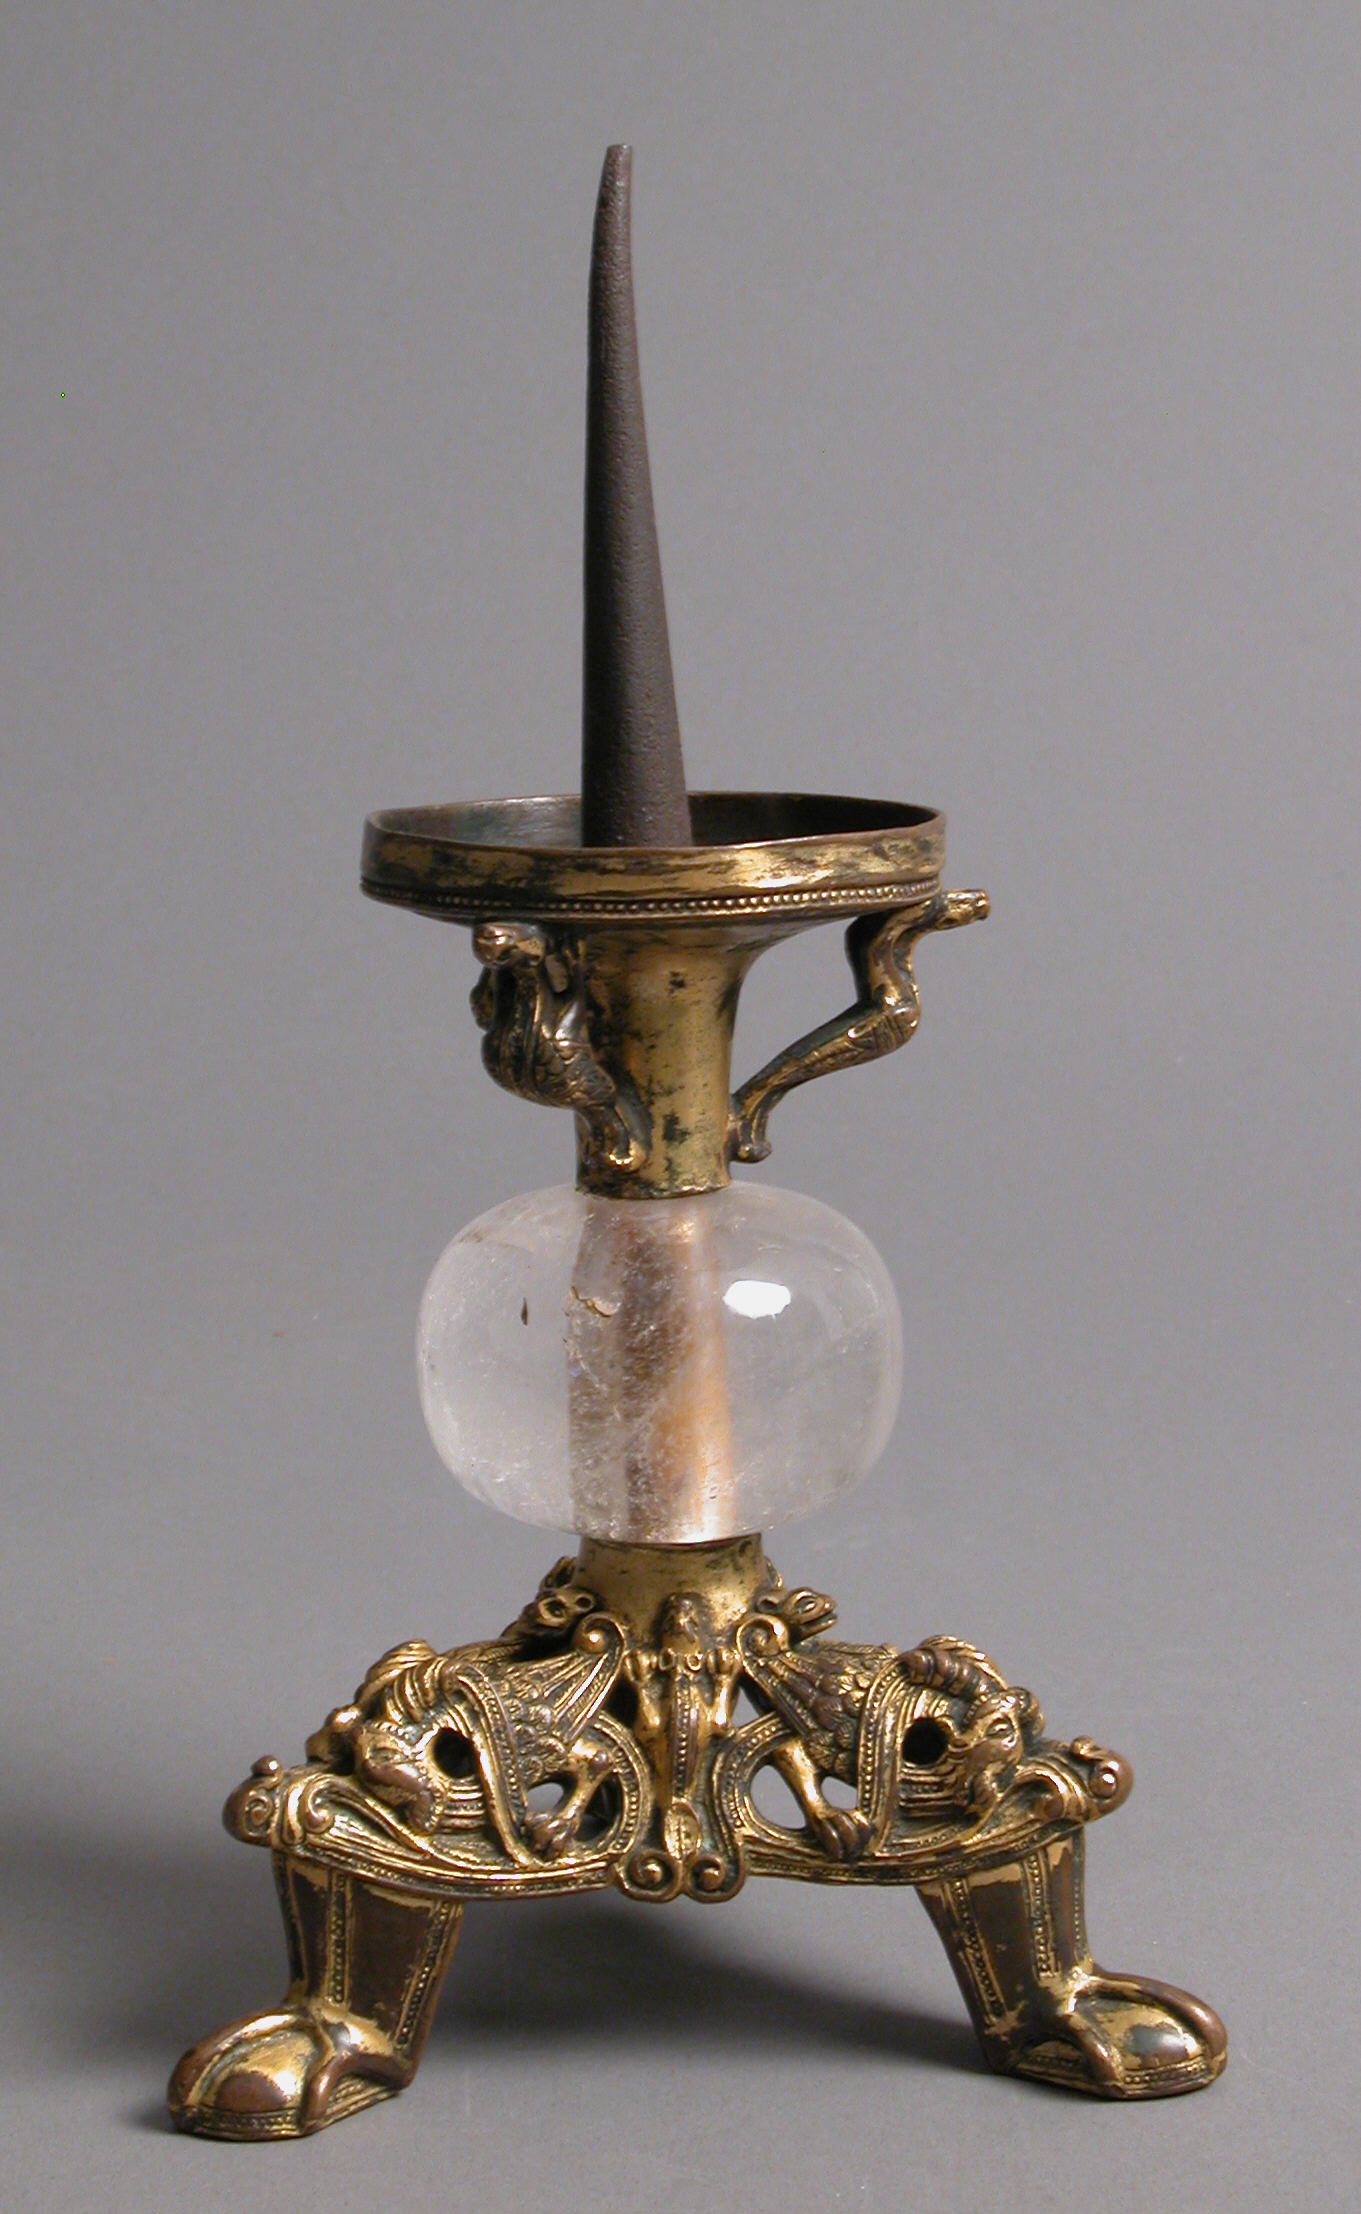 Pricket Candlestick with Fantastic Creatures, South Netherlandish